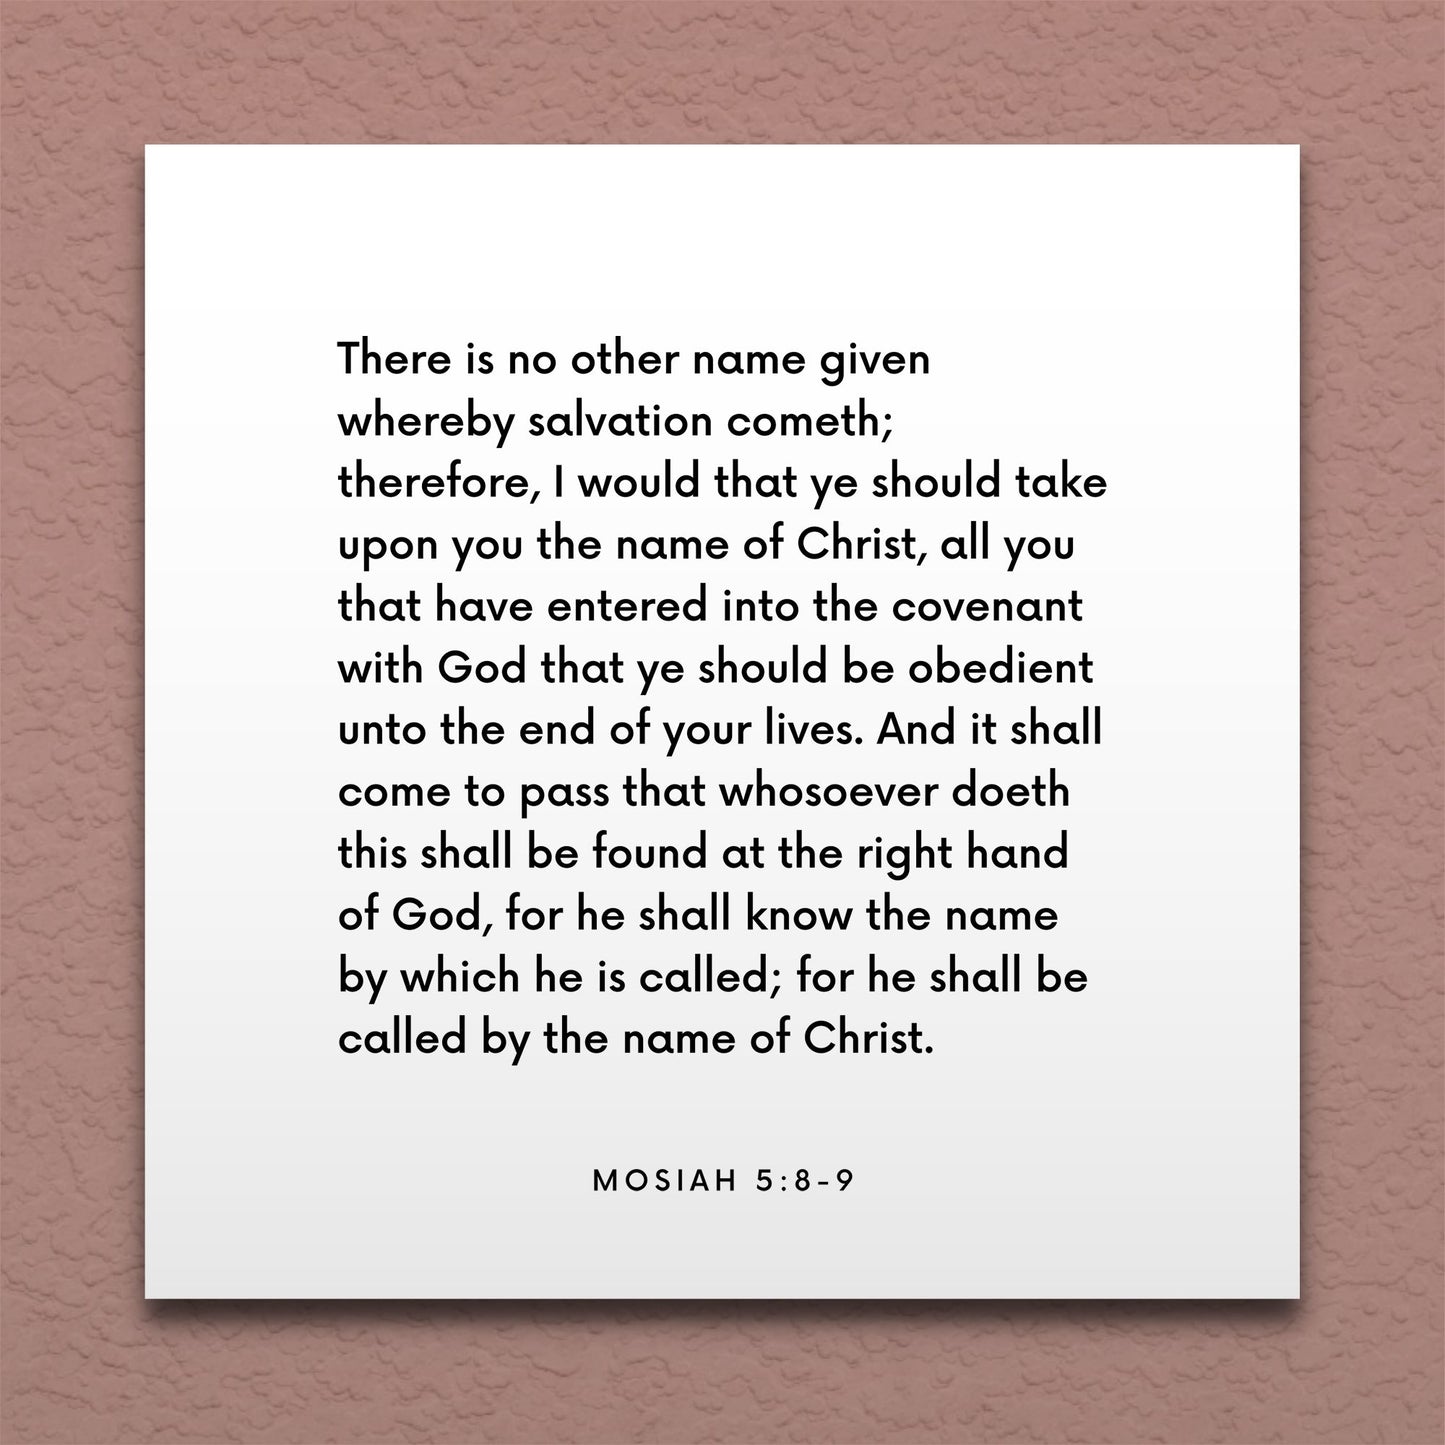 Wall-mounted scripture tile for Mosiah 5:8-9 - "There is no other name given whereby salvation cometh"